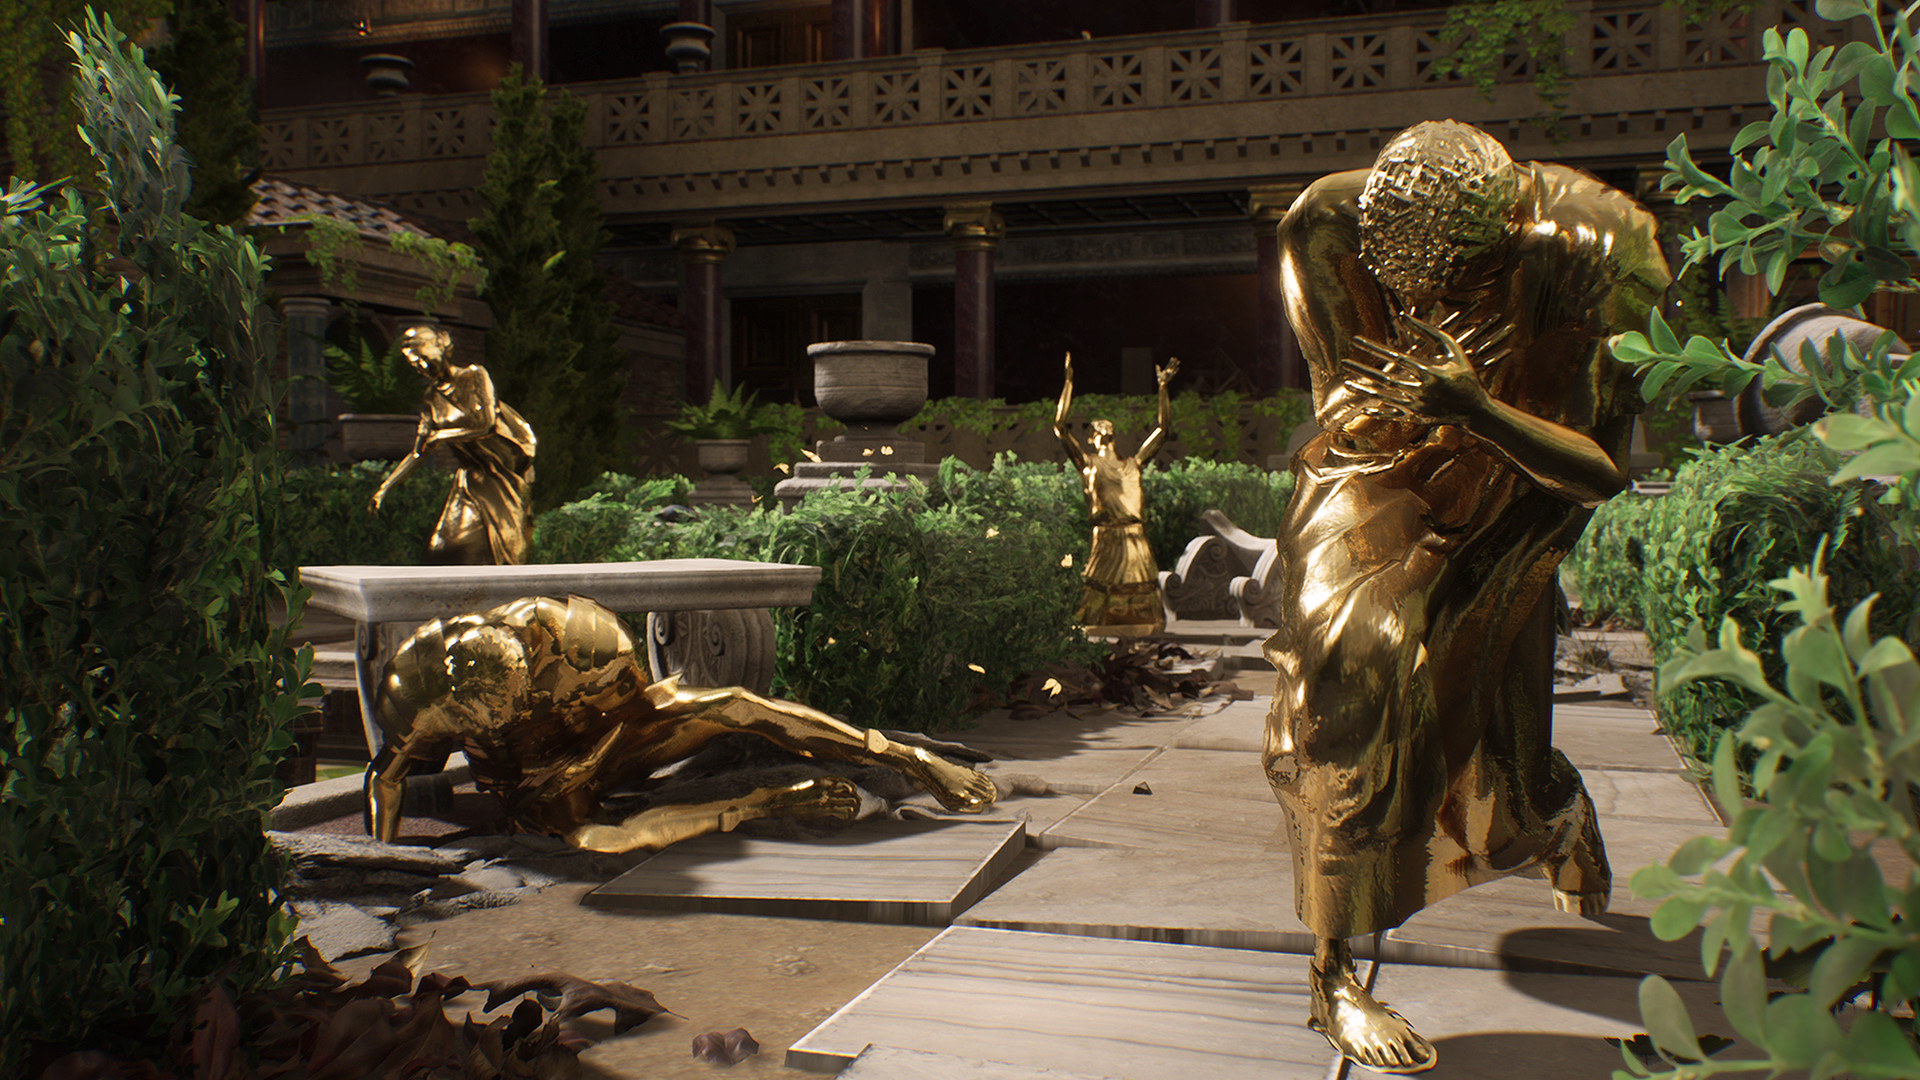 A screenshot from the video game The Forgotten City where multiple gold statues in poses of distress are placed throughout a Roman garden.